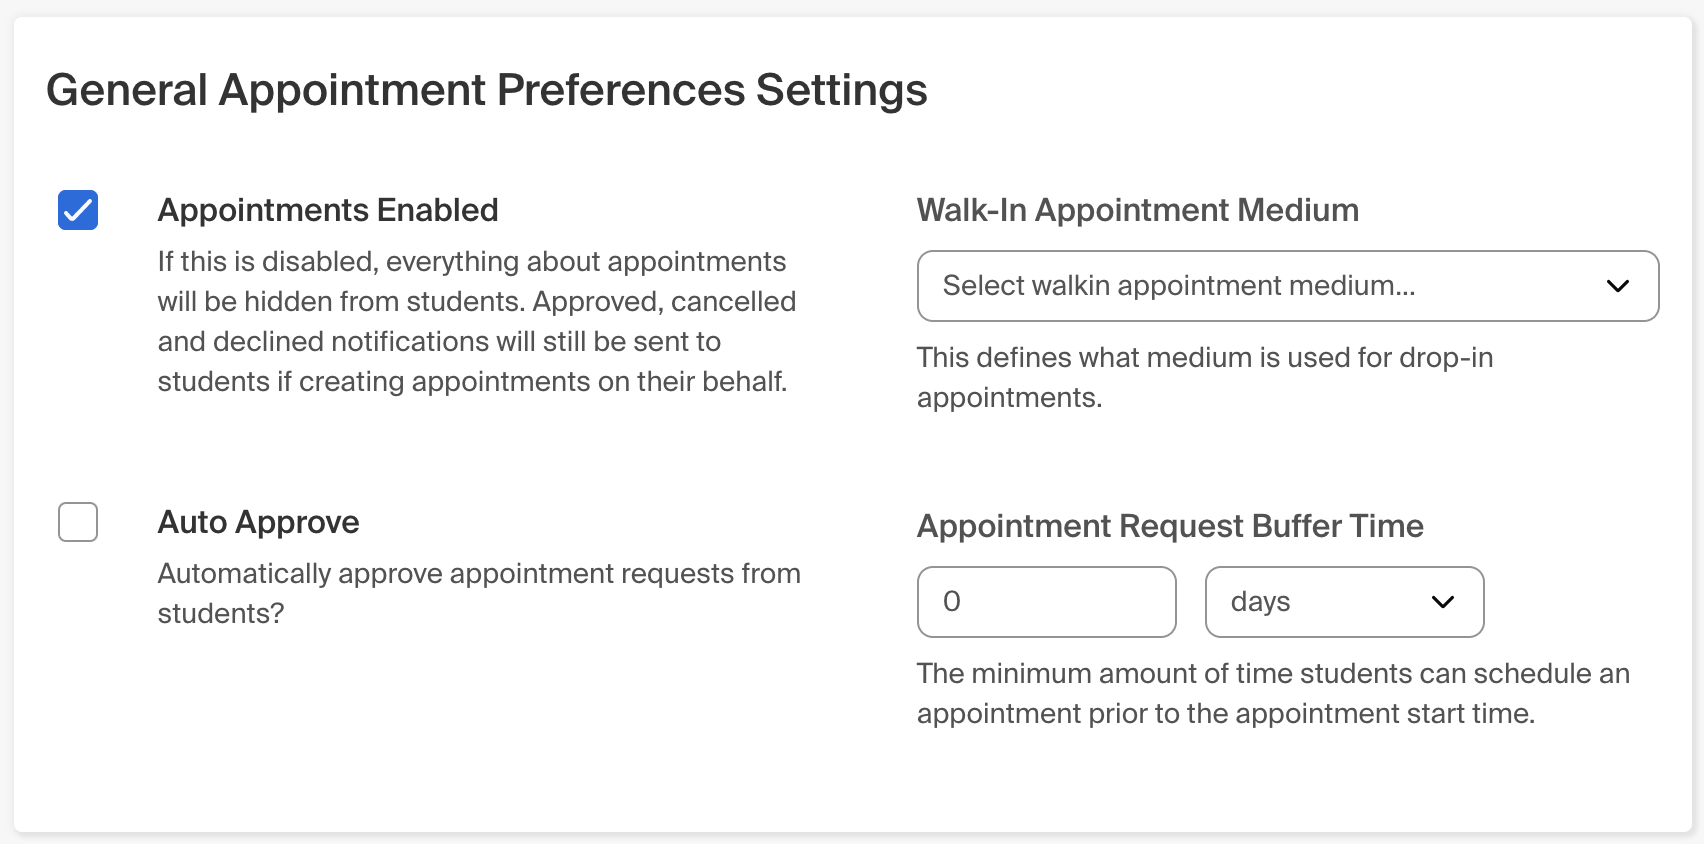 General_Appointment_Settings_Image.png